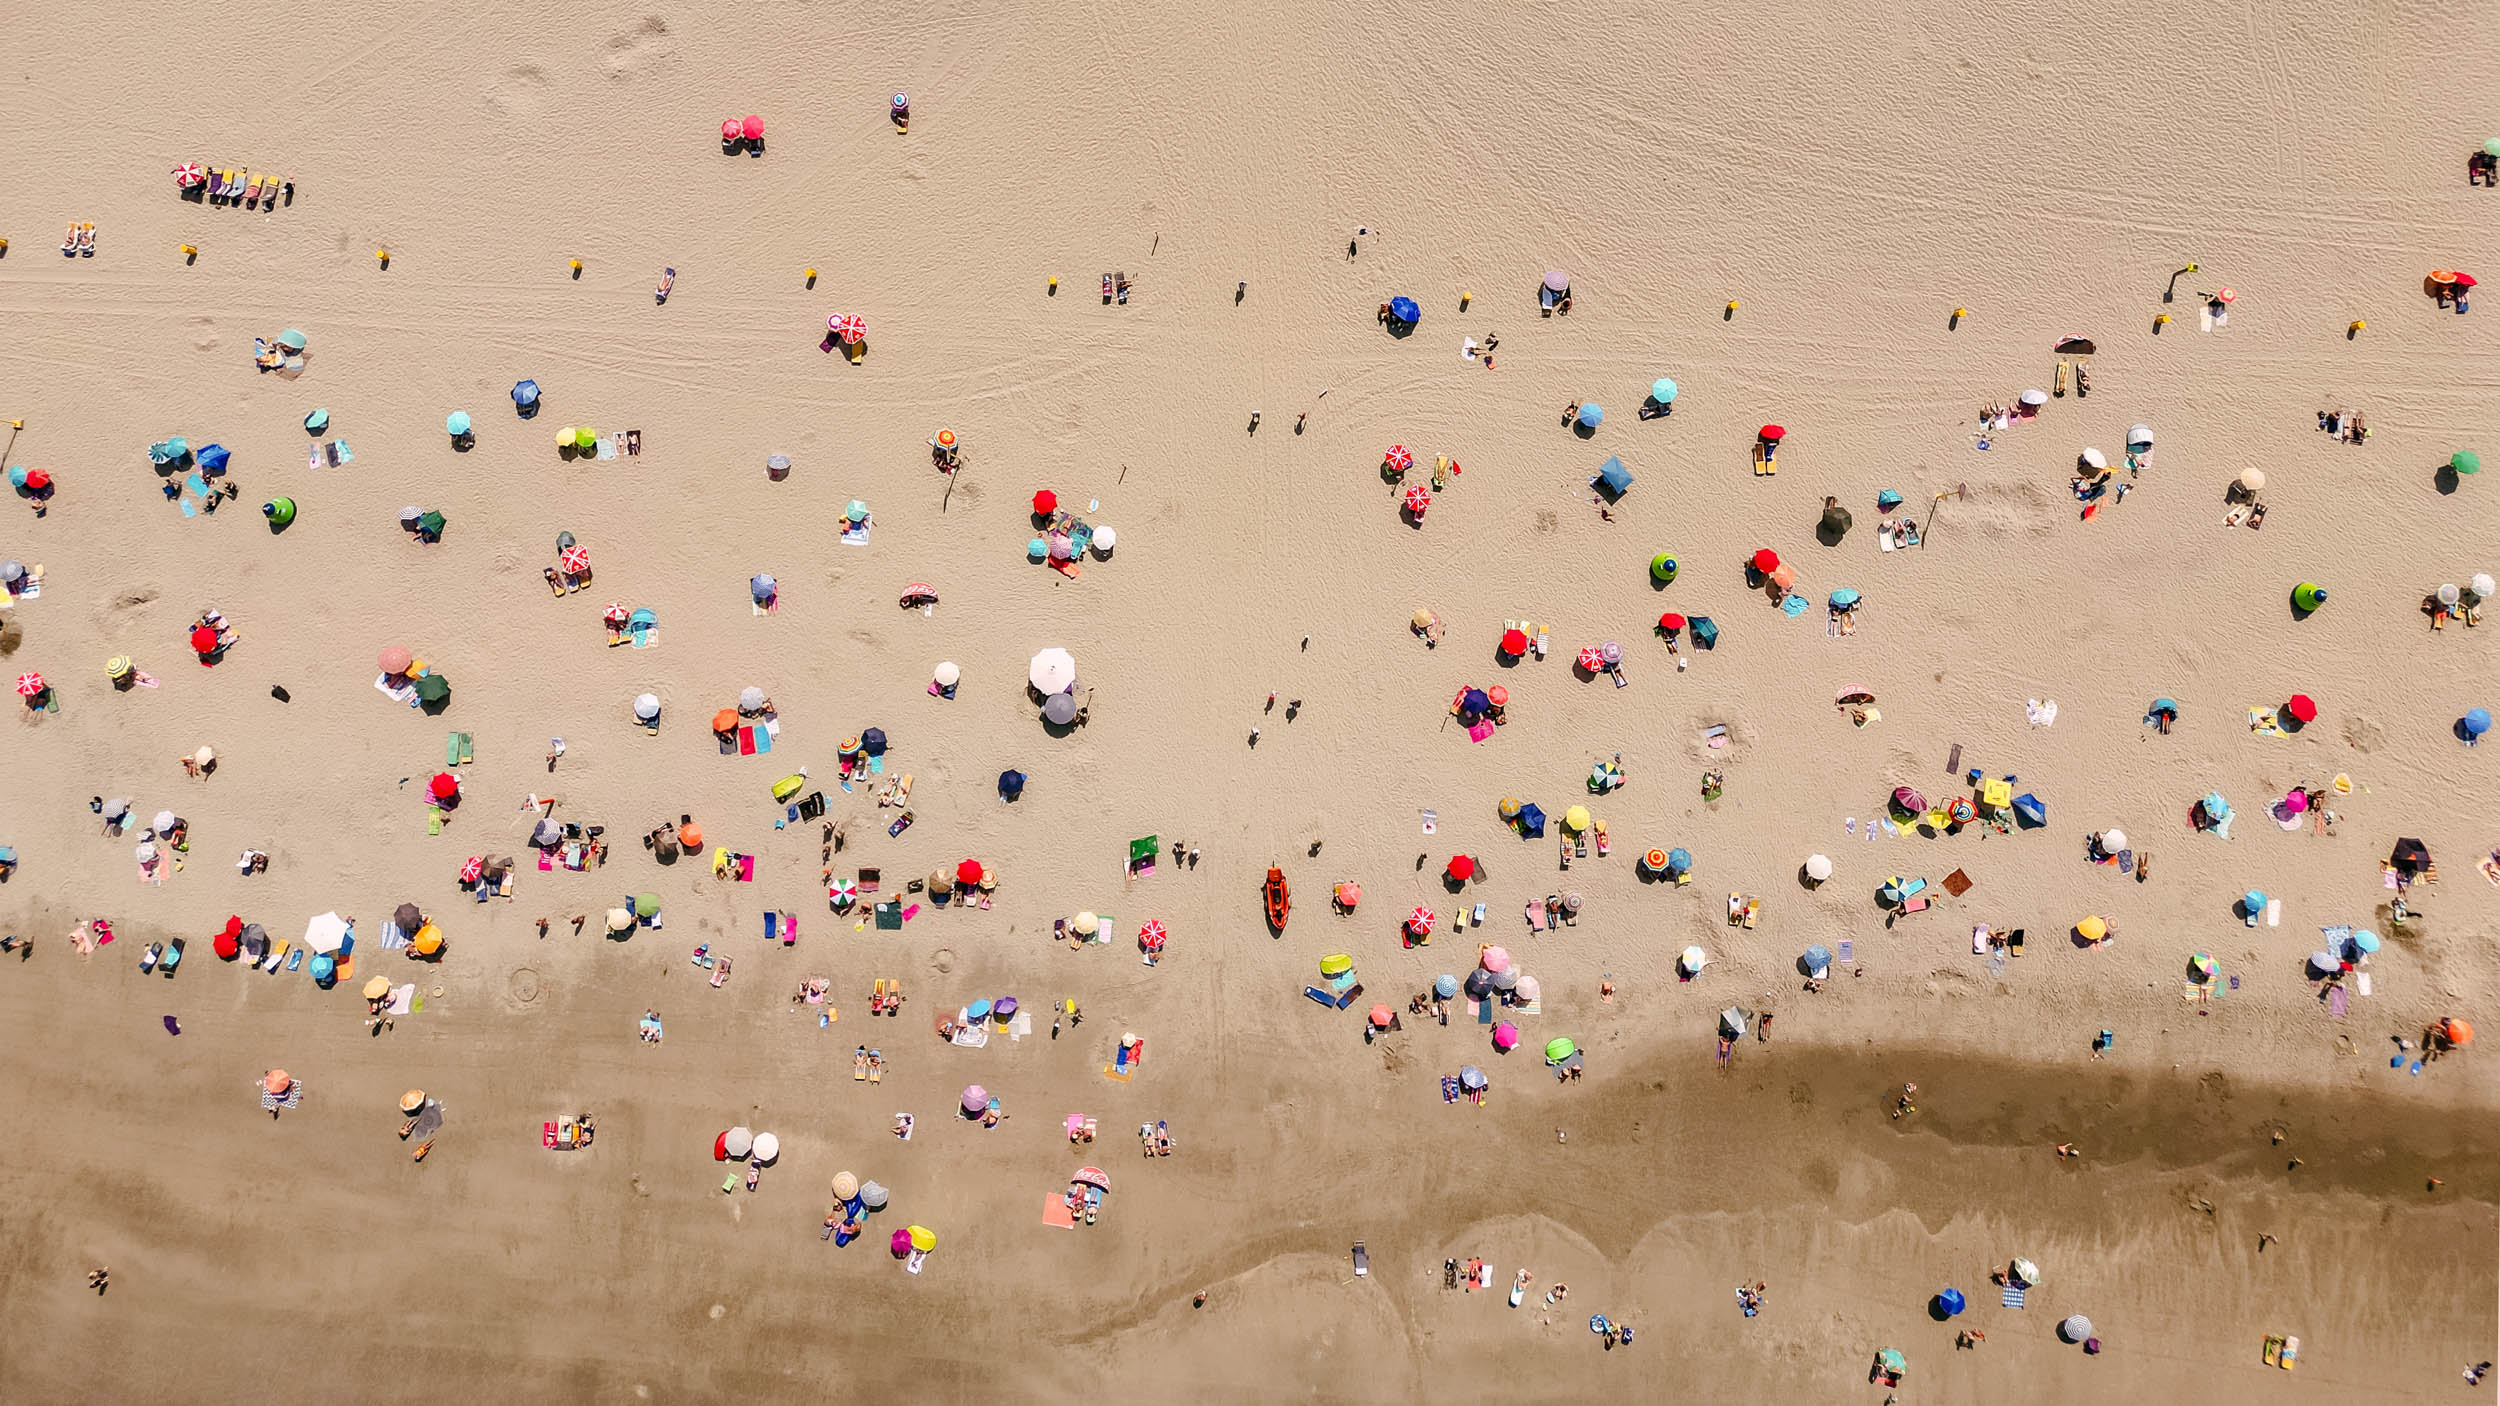 A group of people on a beach with umbrellas.